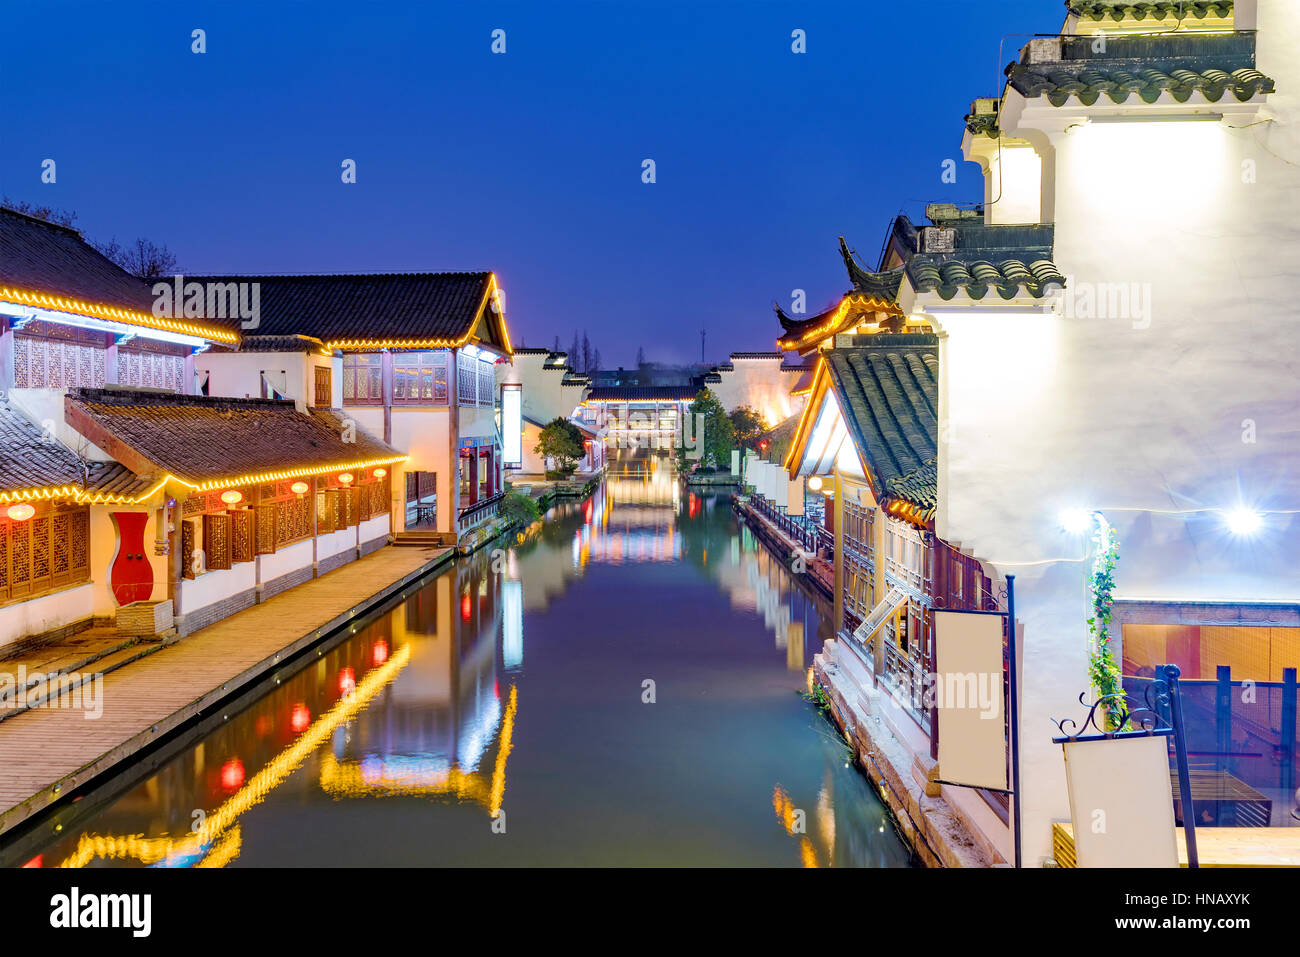 traditional Chinese architecture on a river at night in Nanjing Stock Photo